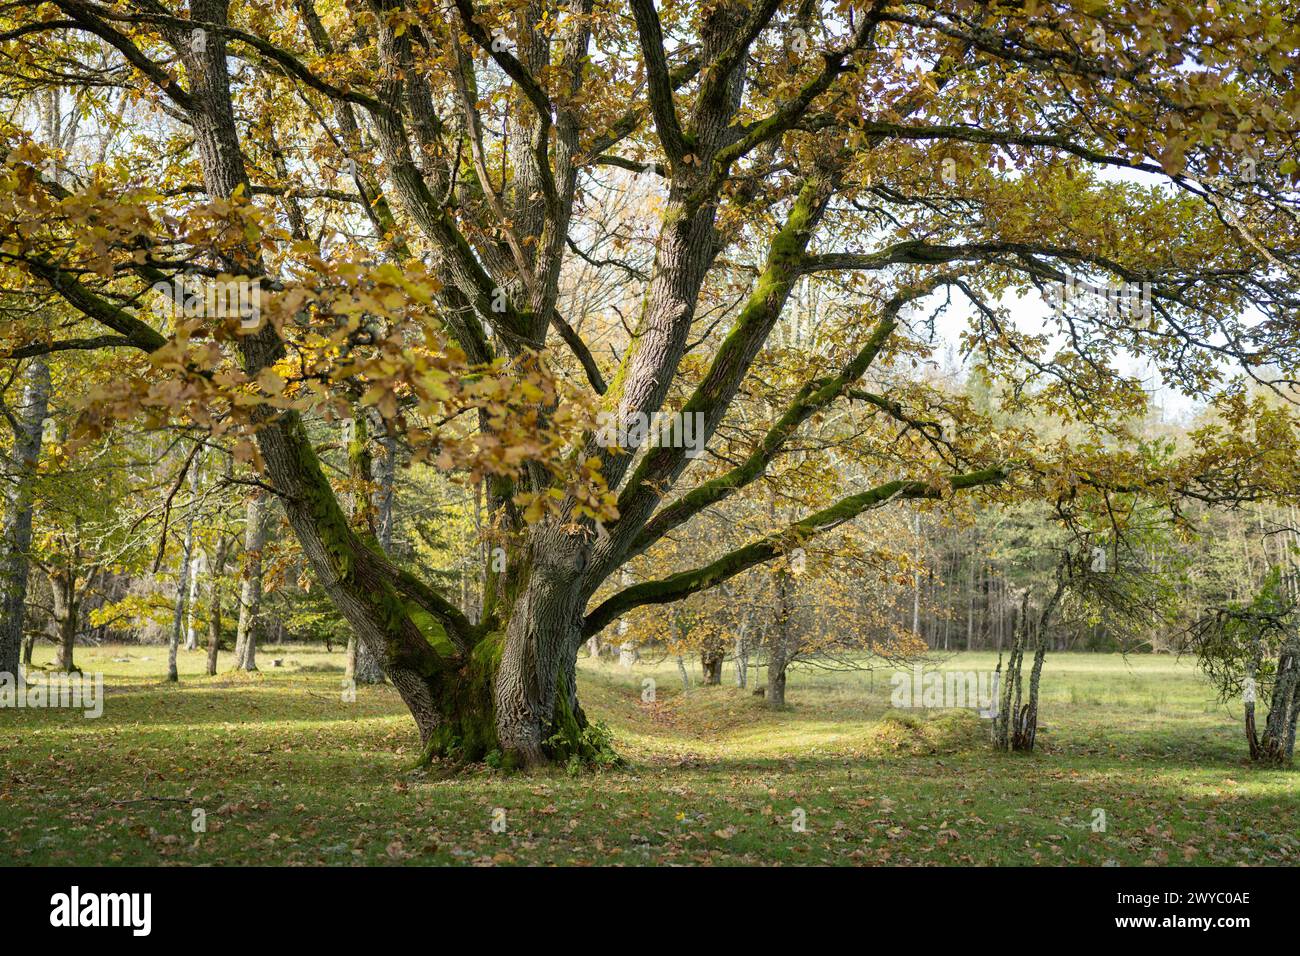 Old oak (Quercus robur) with yellow leaves in the sunlight. Scenic fall background. Warm autumn natural scenery. Stock Photo